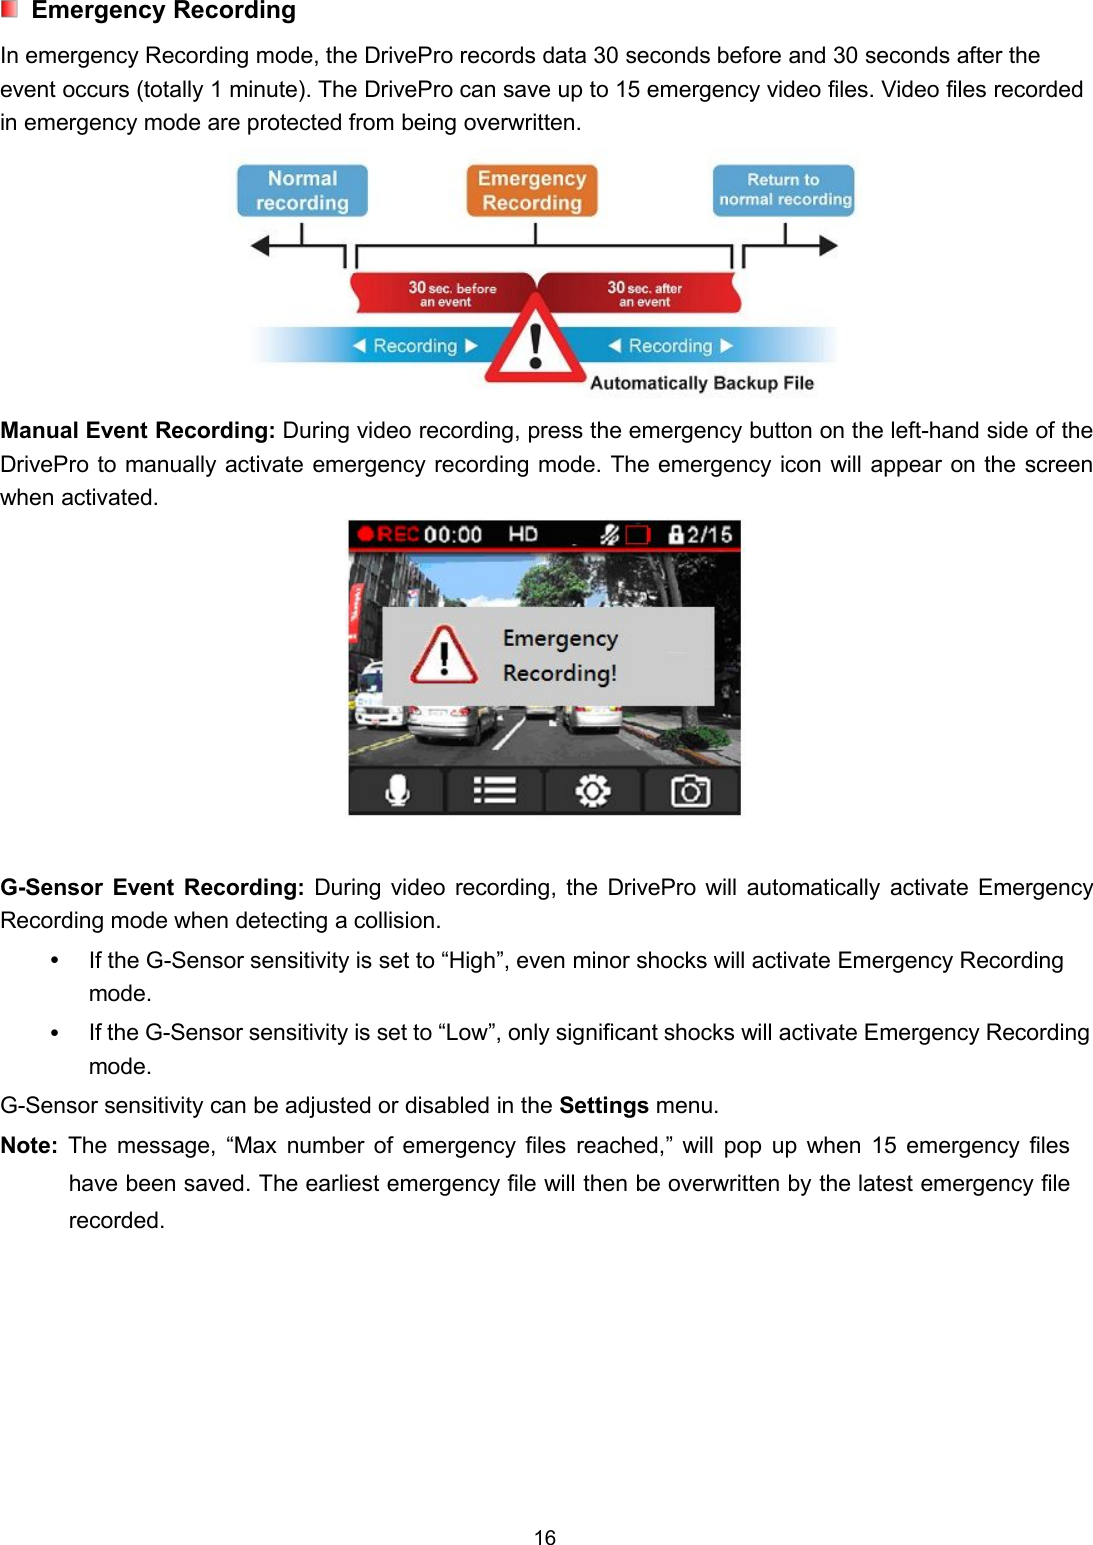 16Emergency RecordingIn emergency Recording mode, the DrivePro records data 30 seconds before and 30 seconds after theevent occurs (totally 1 minute). The DrivePro can save up to 15 emergency video files. Video files recordedin emergency mode are protected from being overwritten.Manual Event Recording: During video recording, press the emergency button on the left-hand side of theDrivePro to manually activate emergency recording mode. The emergency icon will appear on the screenwhen activated.G-Sensor Event Recording: During video recording, the DrivePro will automatically activate EmergencyRecording mode when detecting a collision.If the G-Sensor sensitivity is set to “High”, even minor shocks will activate Emergency Recordingmode.If the G-Sensor sensitivity is set to “Low”, only significant shocks will activate Emergency Recordingmode.G-Sensor sensitivity can be adjusted or disabled in the Settings menu.Note: The message, “Max number of emergency files reached,” will pop up when 15 emergency fileshave been saved. The earliest emergency file will then be overwritten by the latest emergency filerecorded.